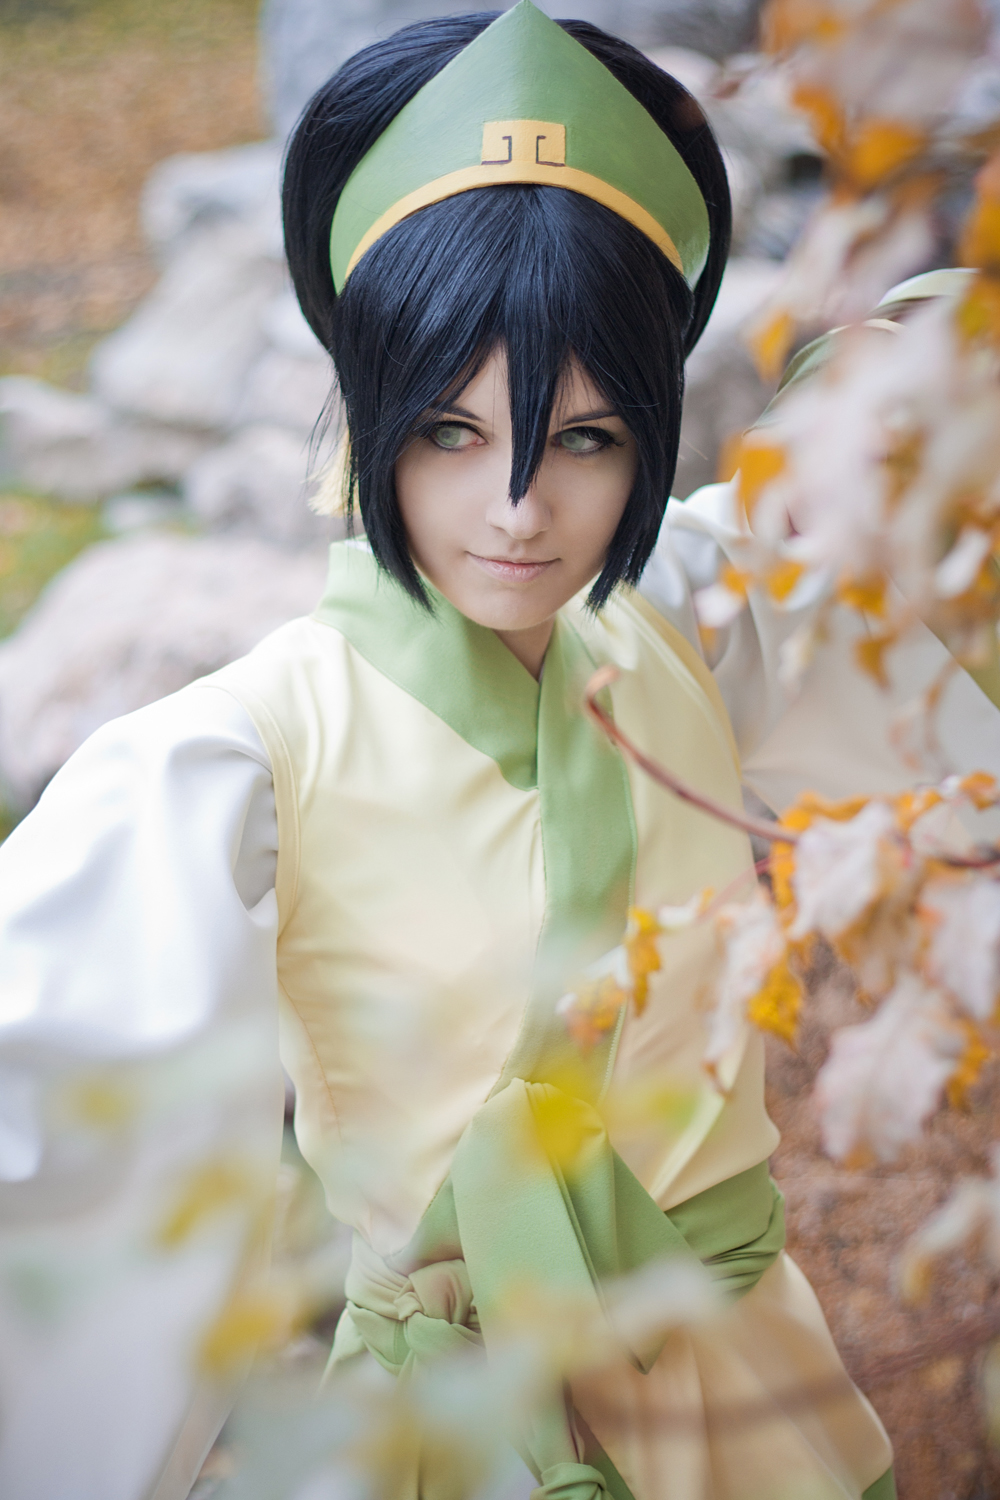 Toph Beifong wig - Avatar the Last Airbender 